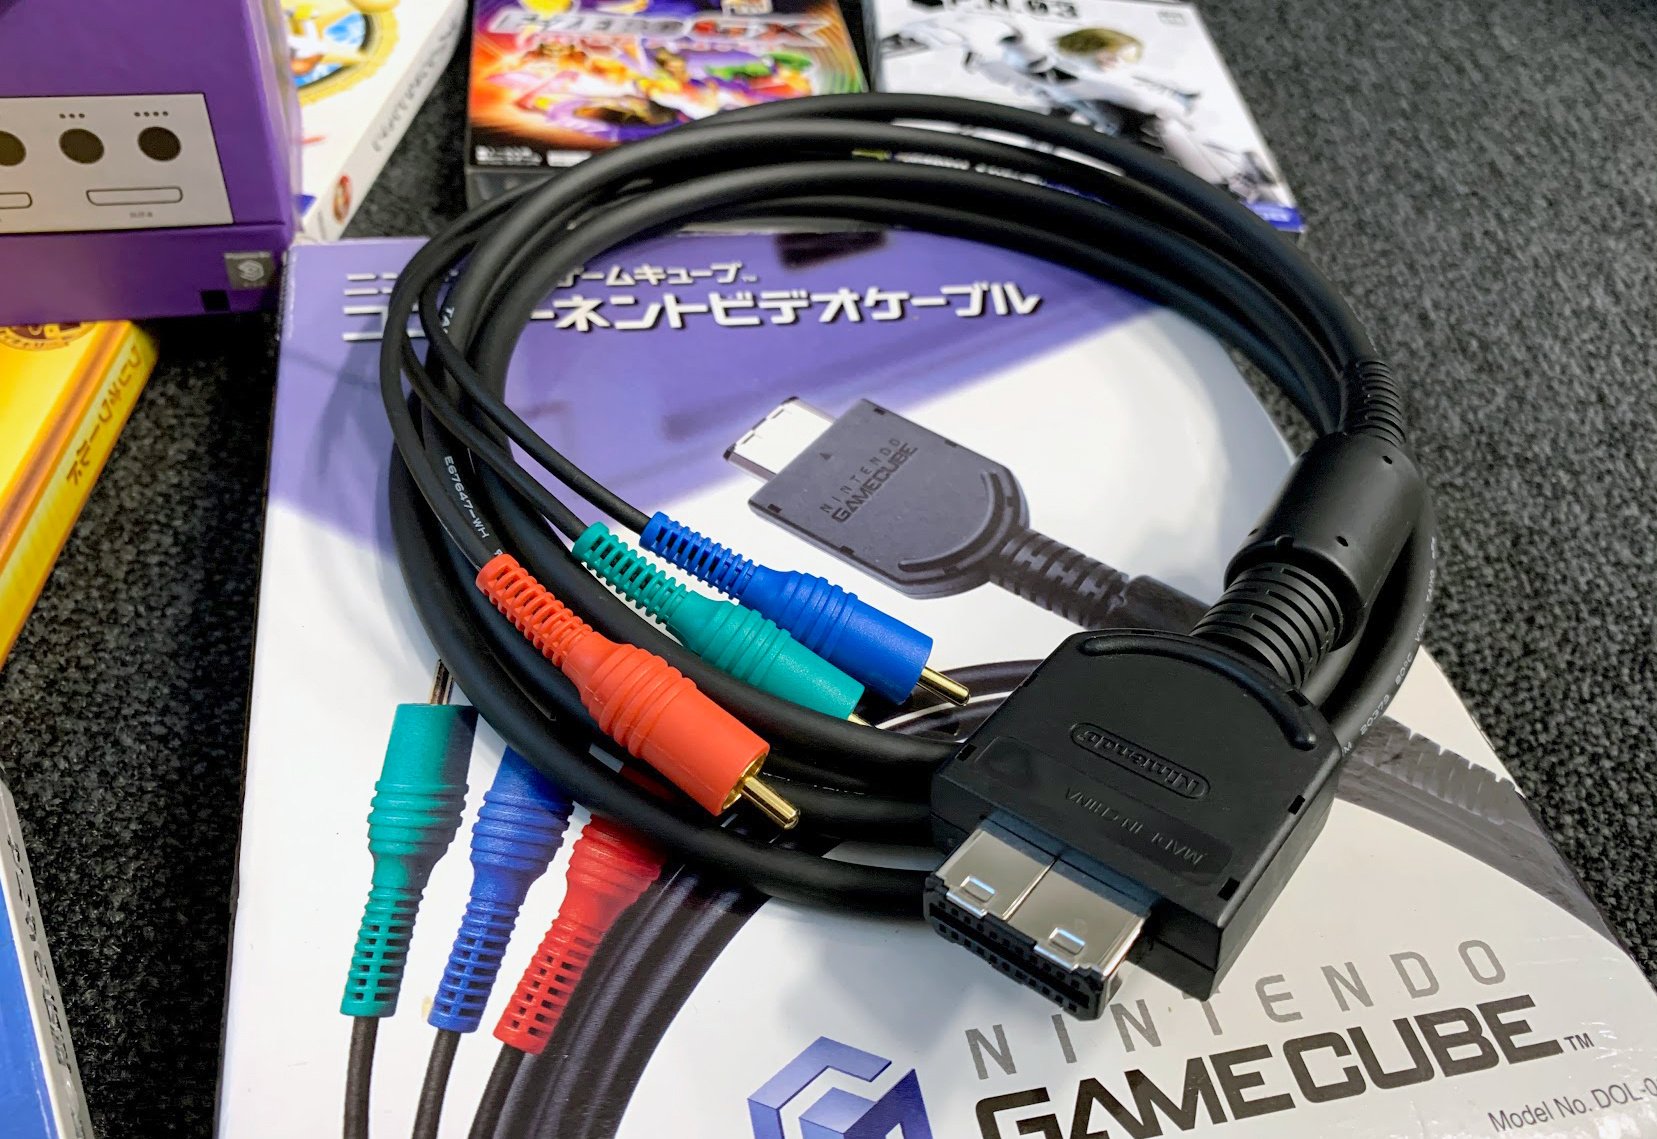 Carby GameCube Component Cable Compare 